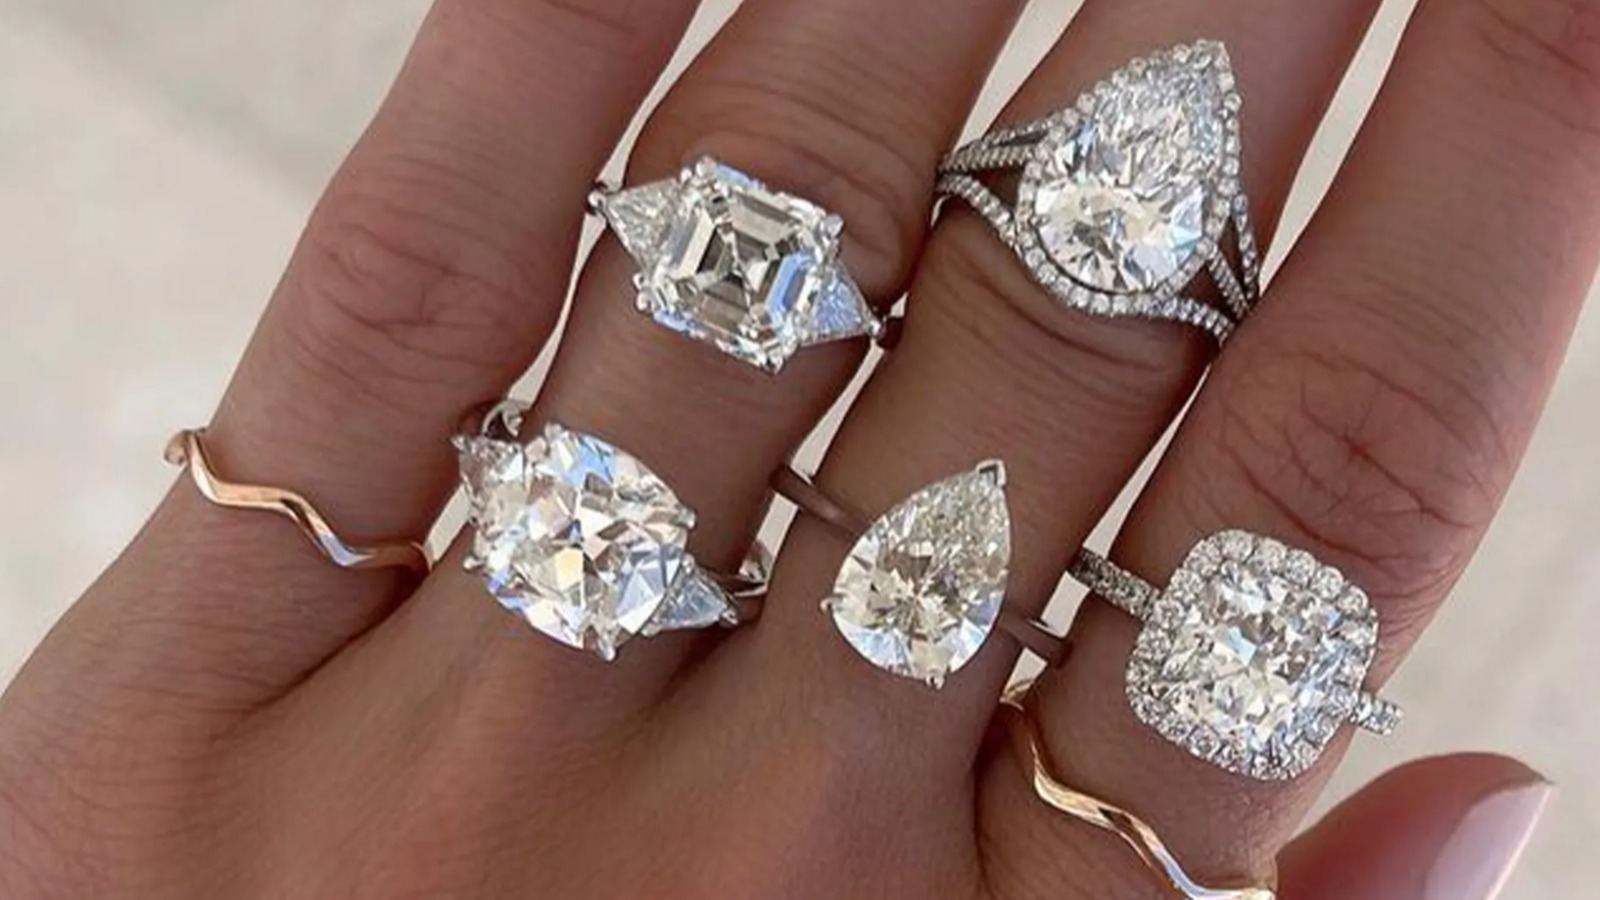 The Most Affordable Diamond Shapes For An Engagement Ring